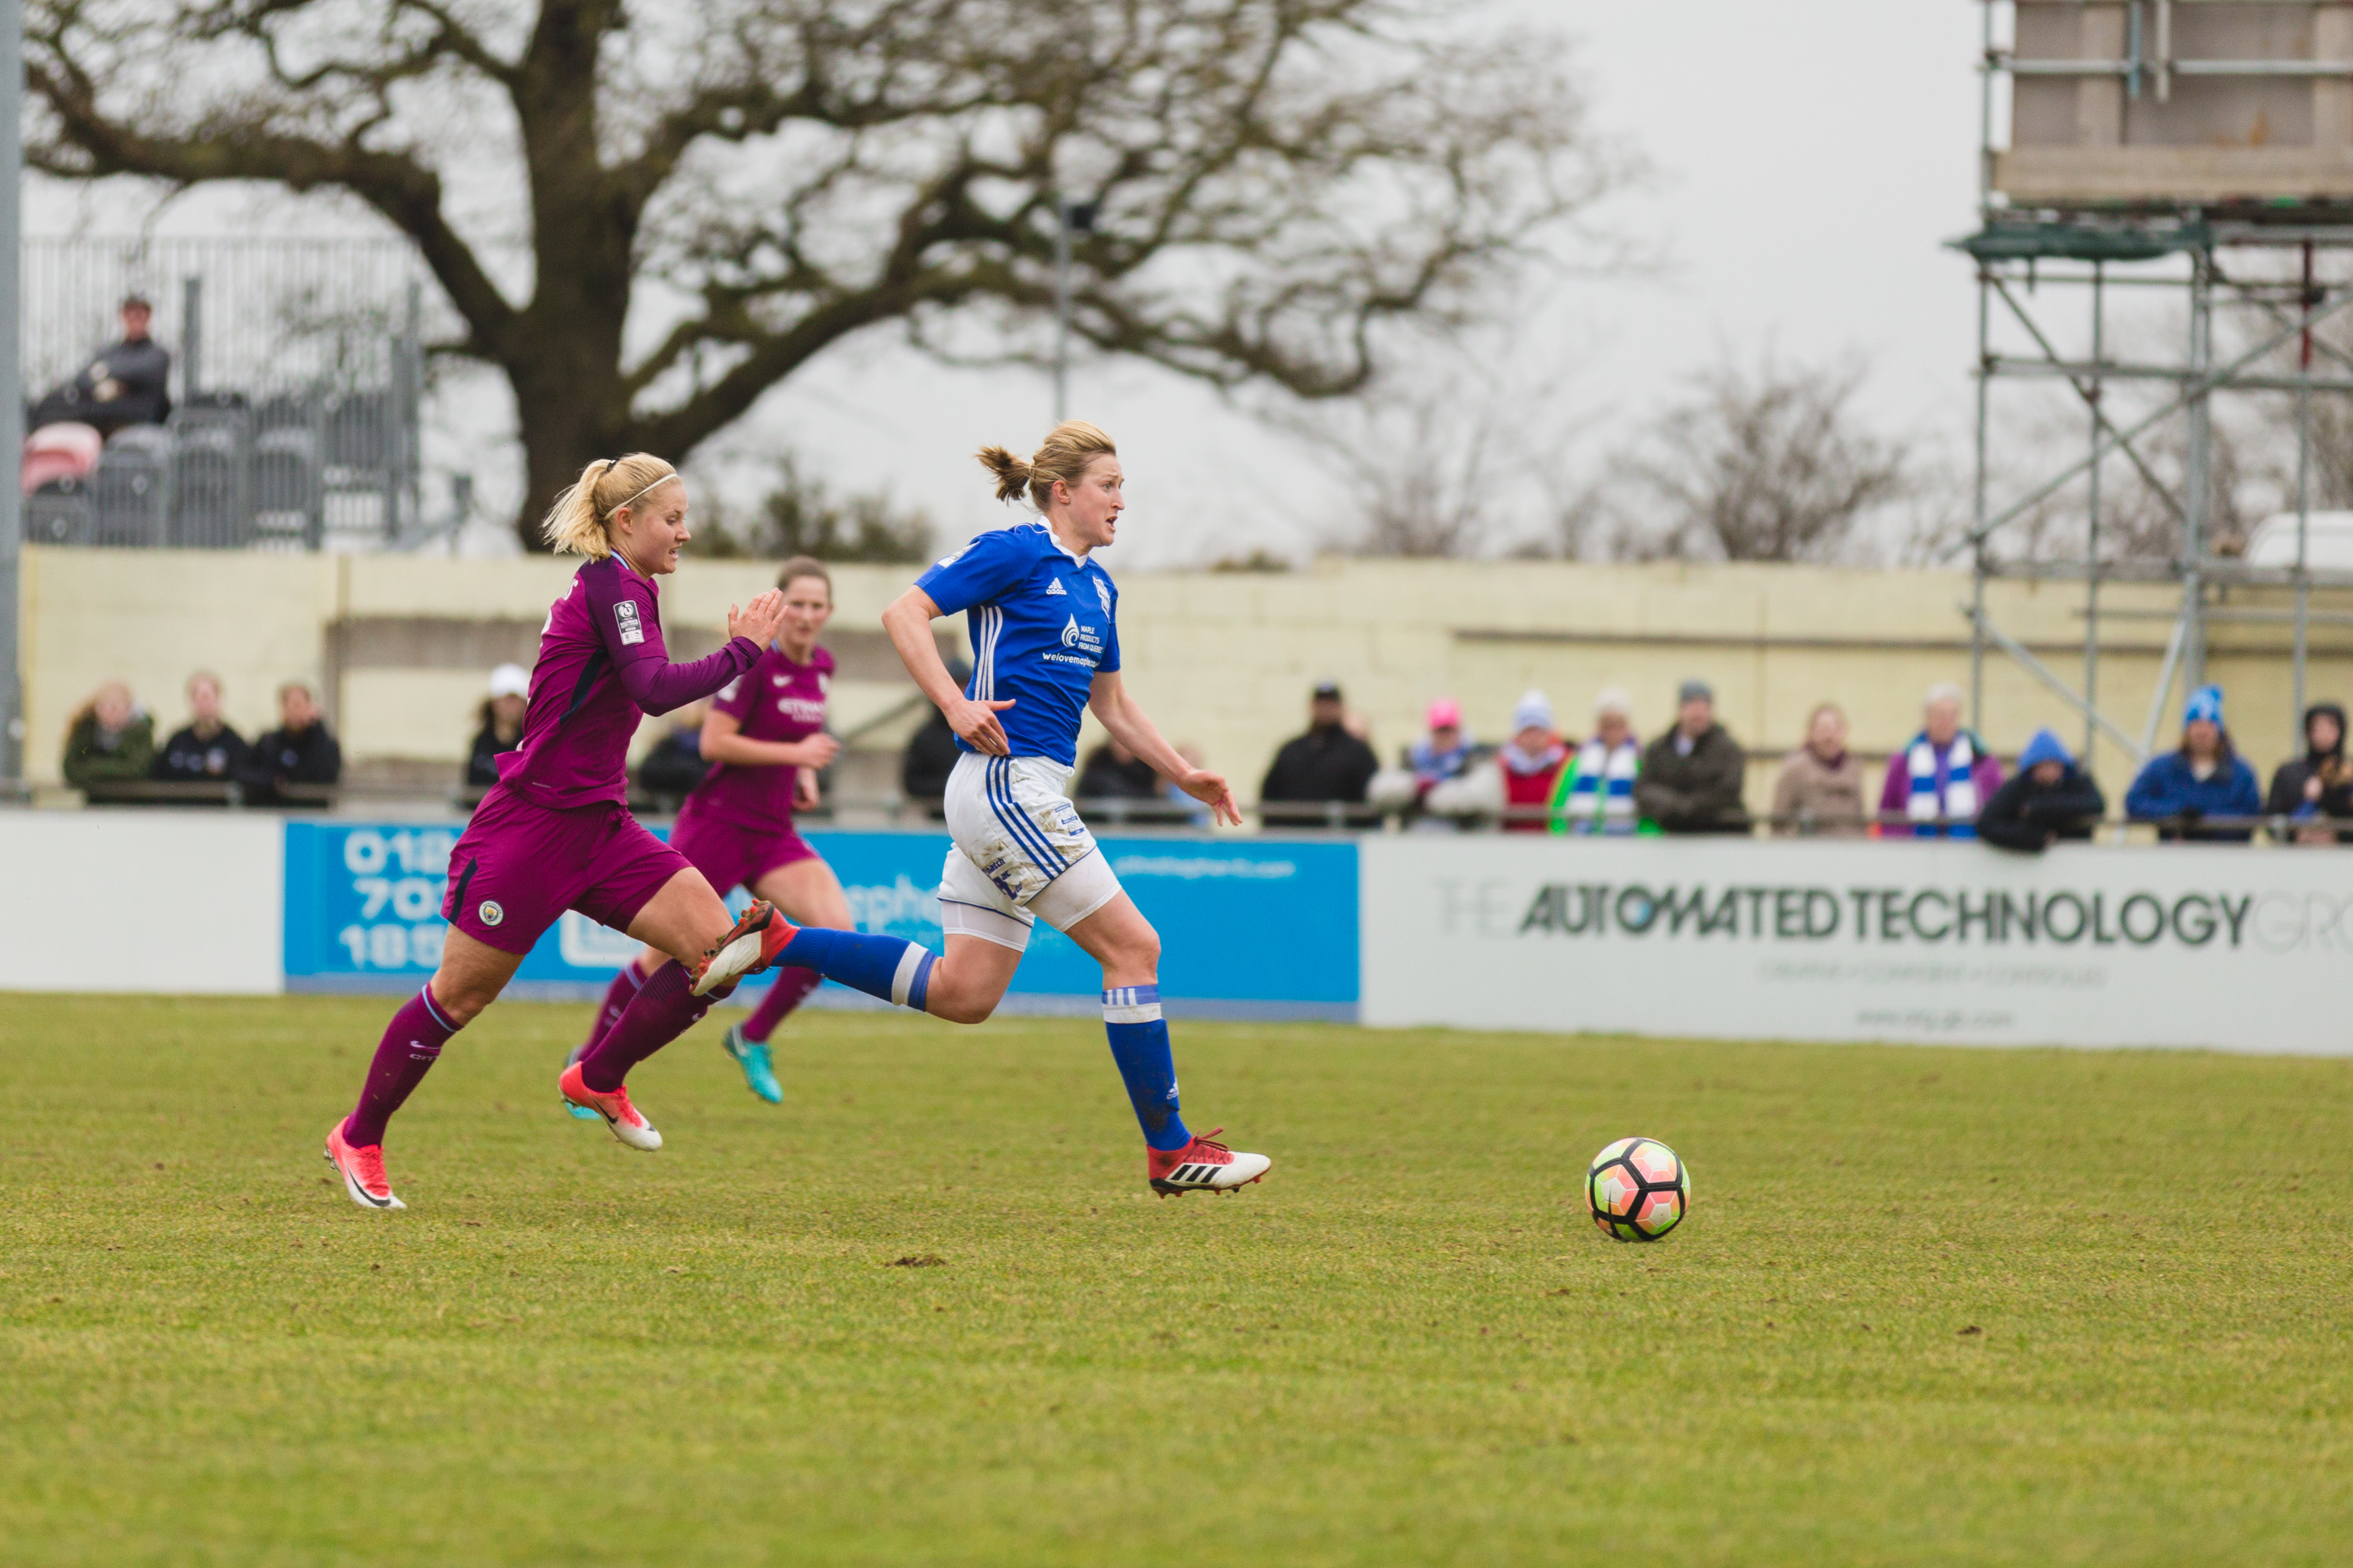 Birmingham City Ladies FC player beating out other players to the ball